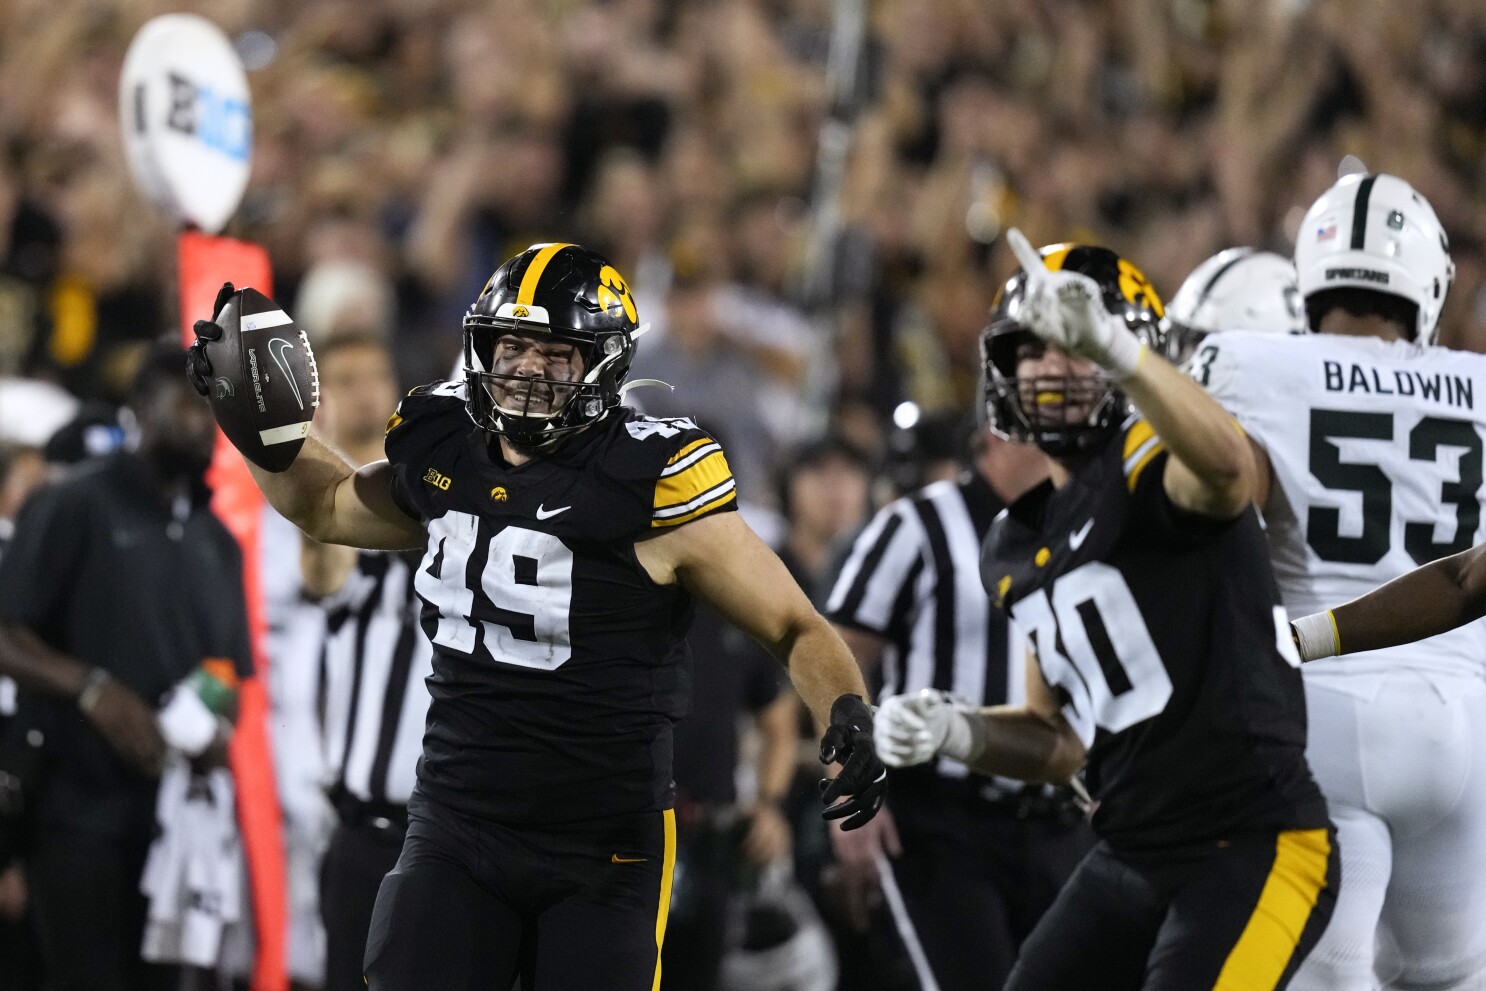 Cooper DeJean's fourth-quarter punt return for touchdown lifts Iowa over  Michigan State 26-16